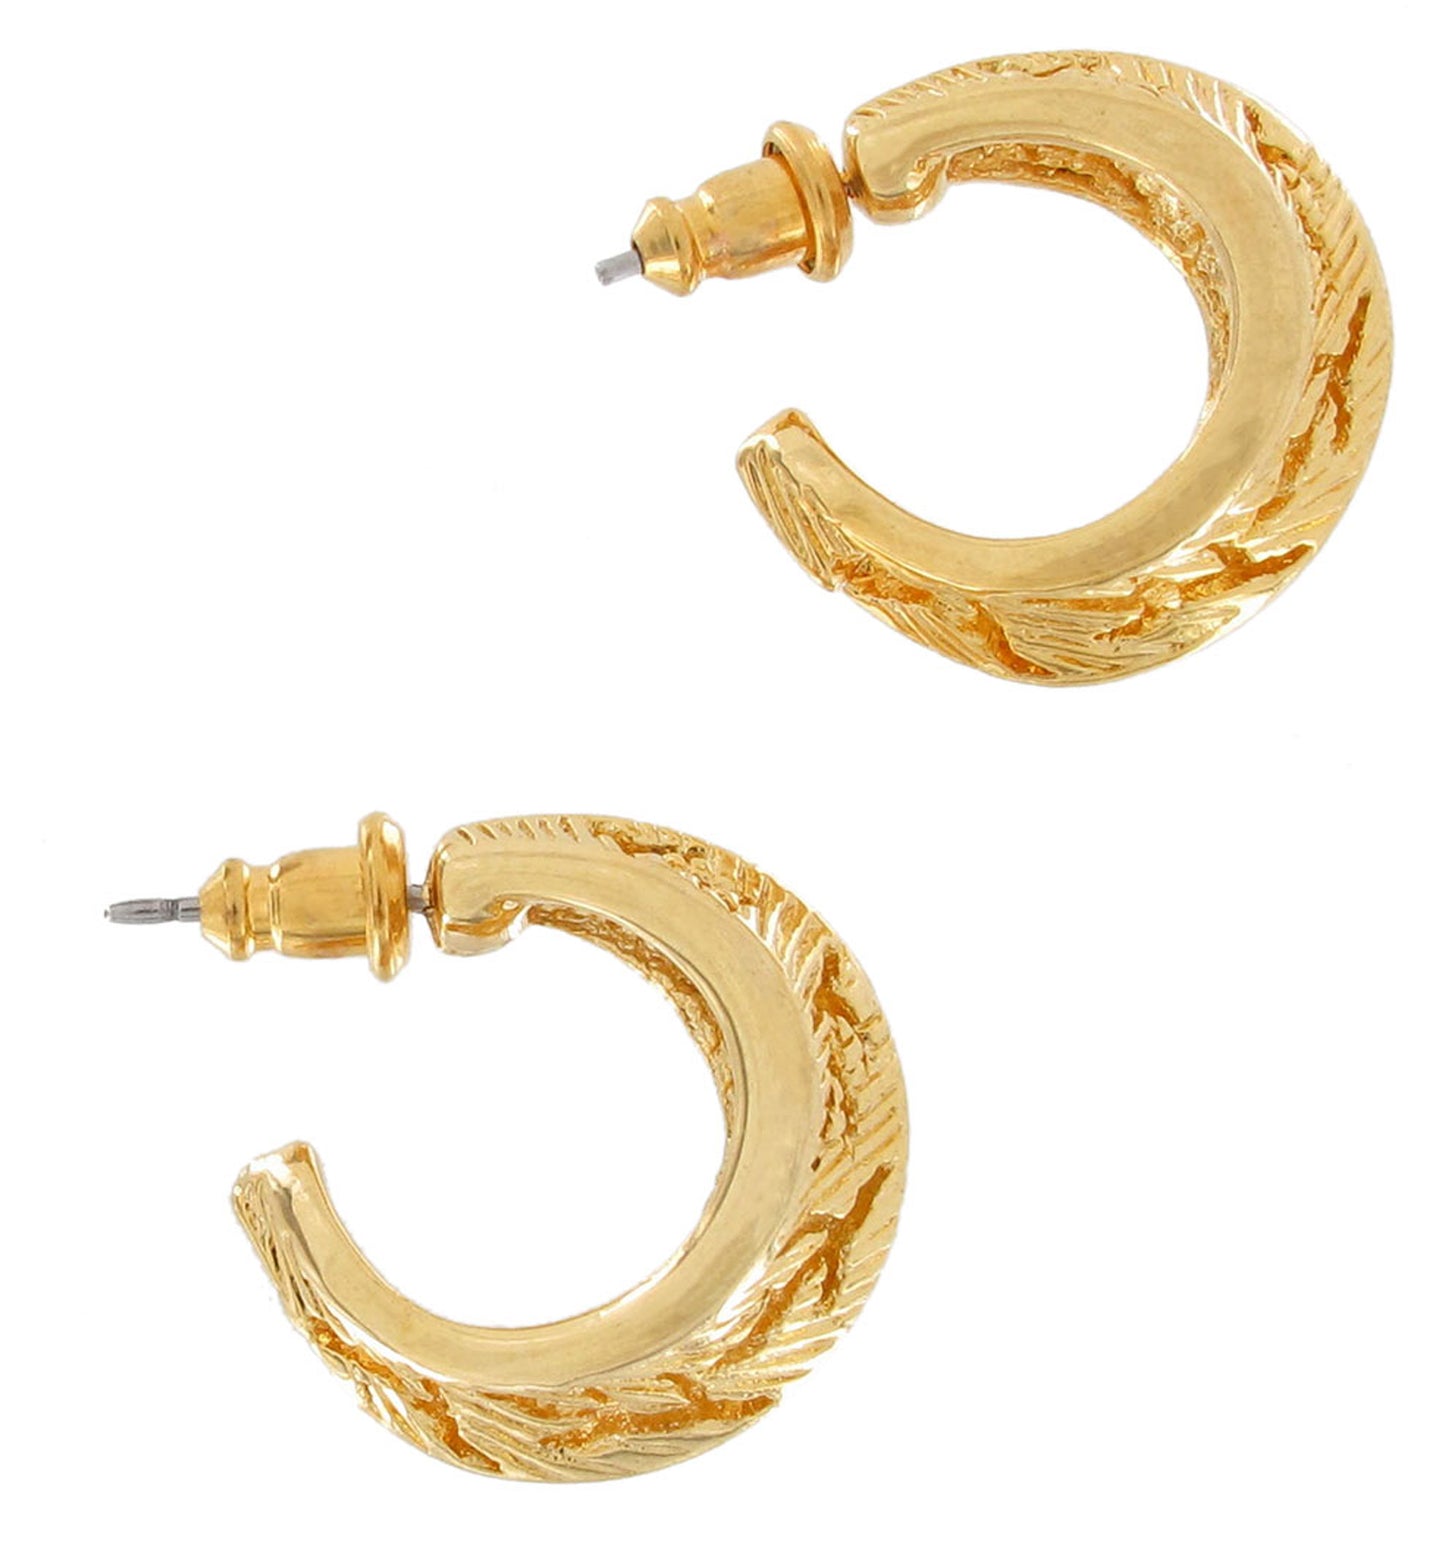 Classic 3/4" Hoop Earrings With Branch Design Pierced - Gold Tone